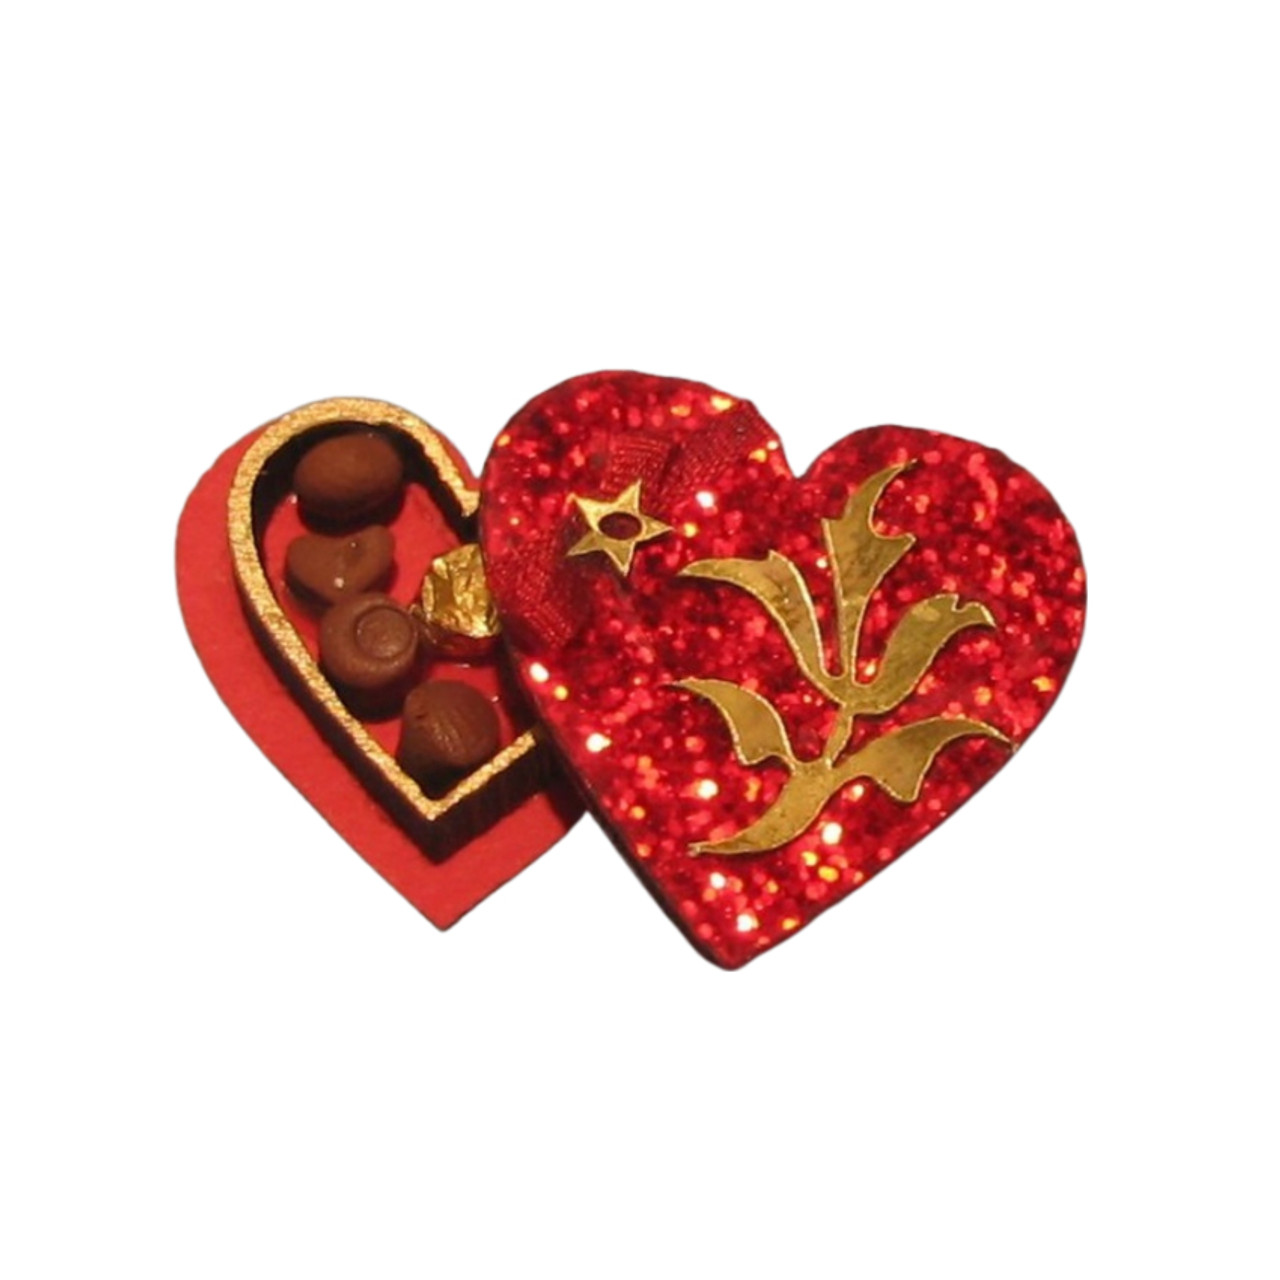 One-inch (1:12) Scale Dollhouse Miniature Heart Shaped Candy Box Kit (DFI-CB201) shown assembled.